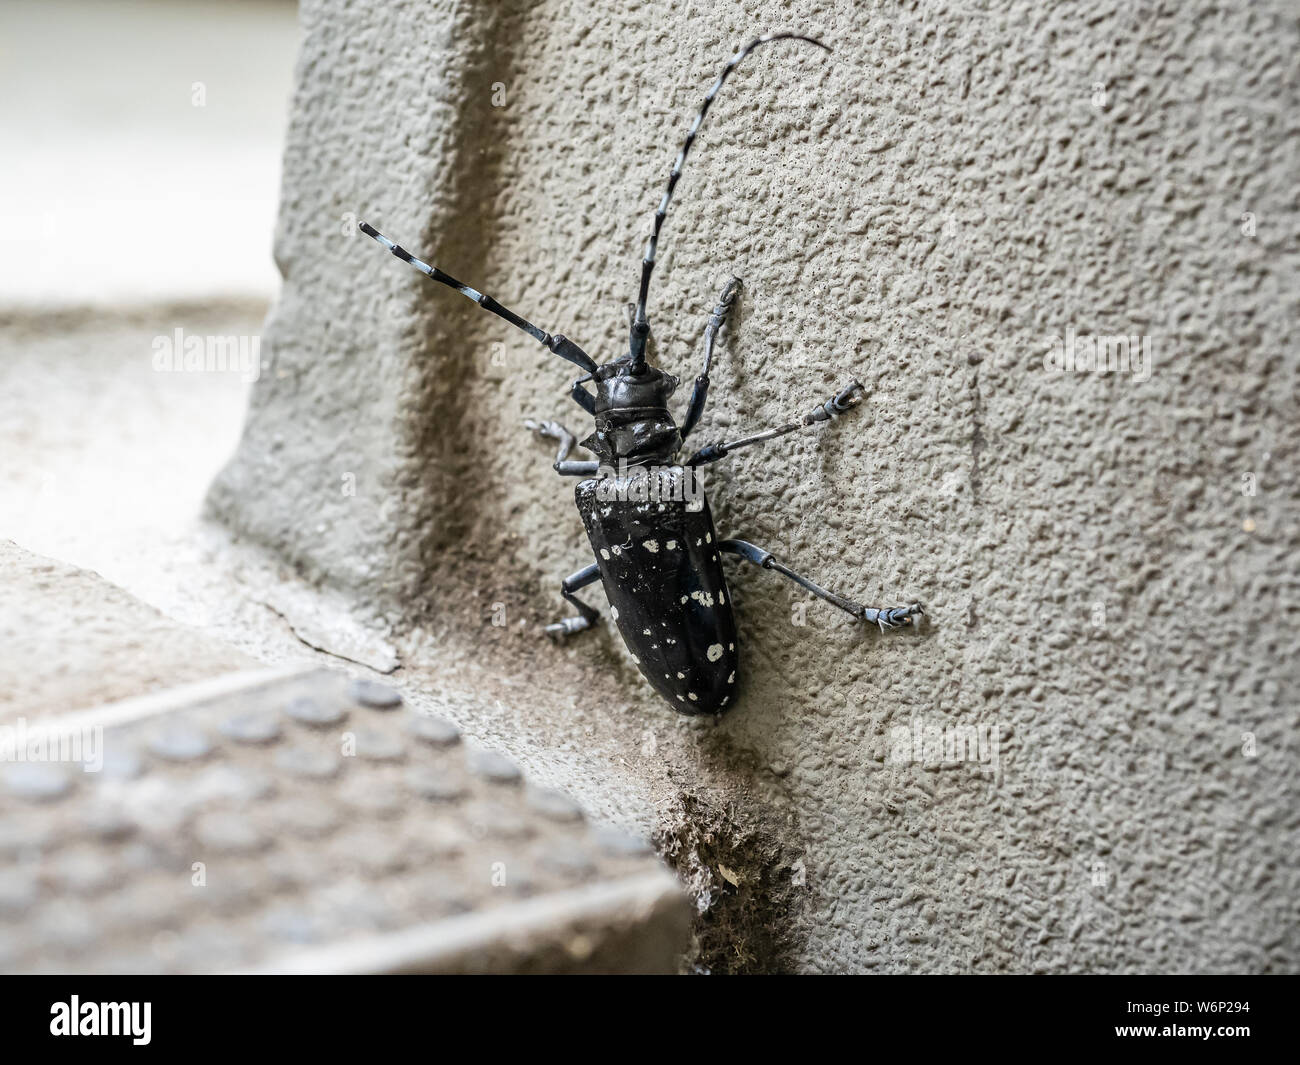 A citrus long-horned beetle, Anoplophora chinensis, climbs up the stair well of an apartment building near a Japanese plum grove and farm. Stock Photo